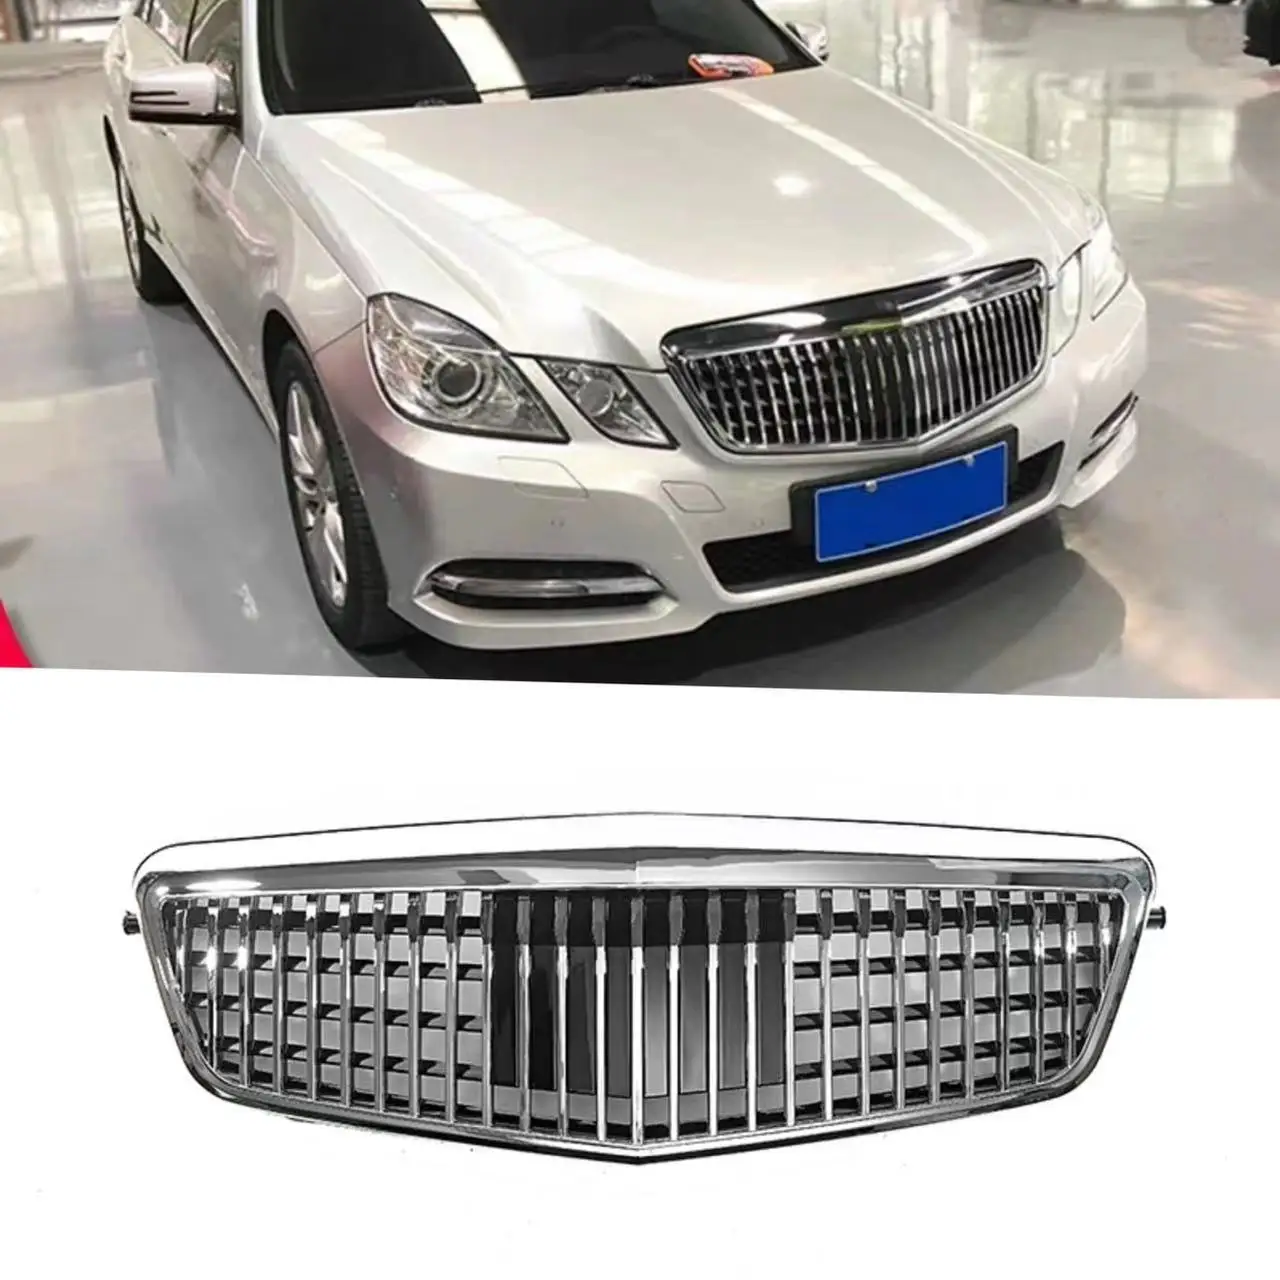 

Glossy Black Radiator Grilles For 2009-2012 Mercedes Benz E W212 Racing Grilles Bumpers Body Kit Hood Gloss Black Car Accessorie